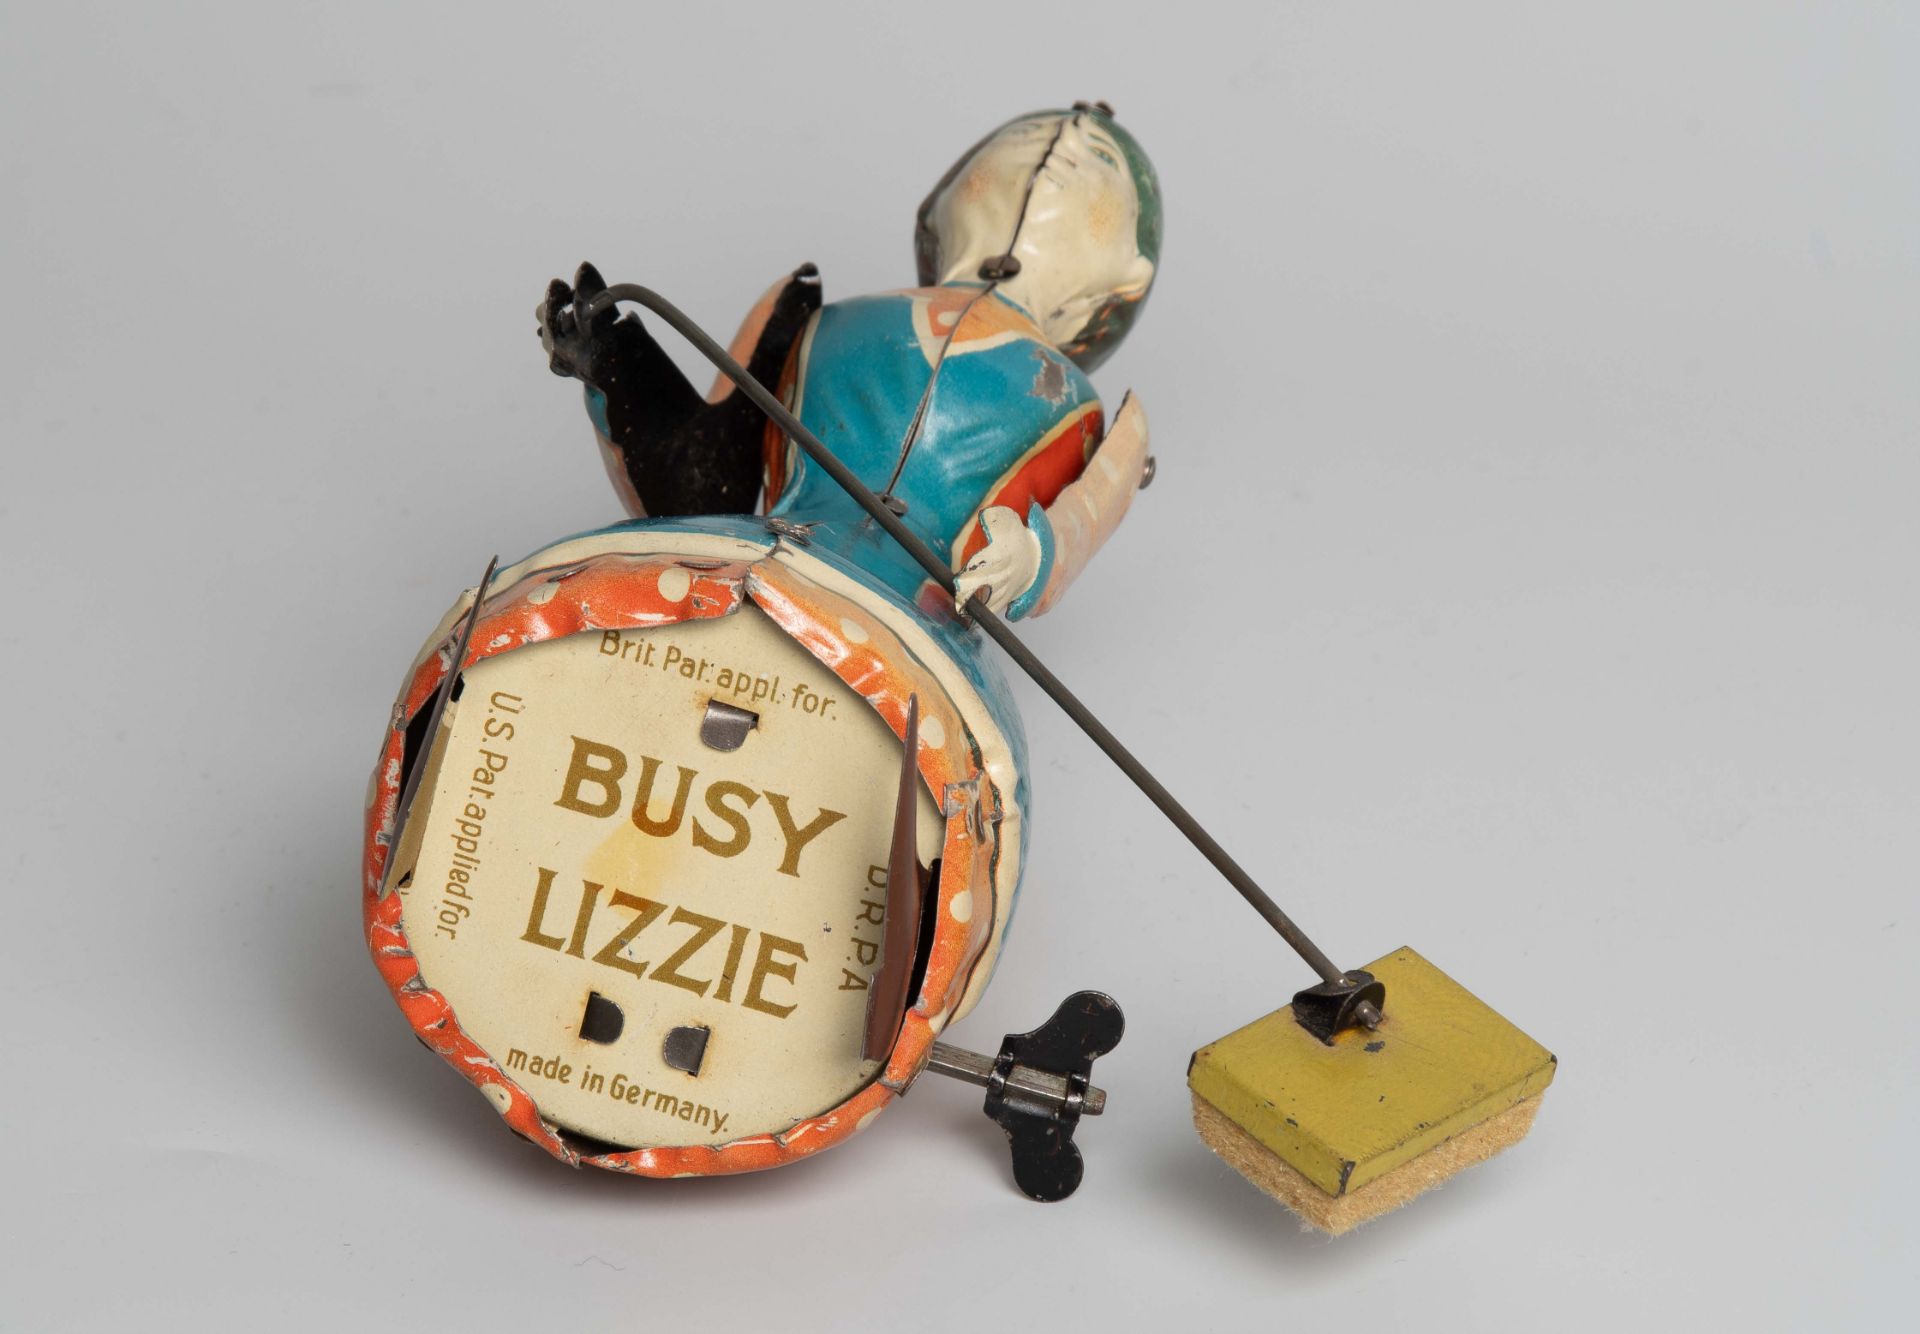 Distler, Figur "Busy Lizzie" - Image 9 of 9